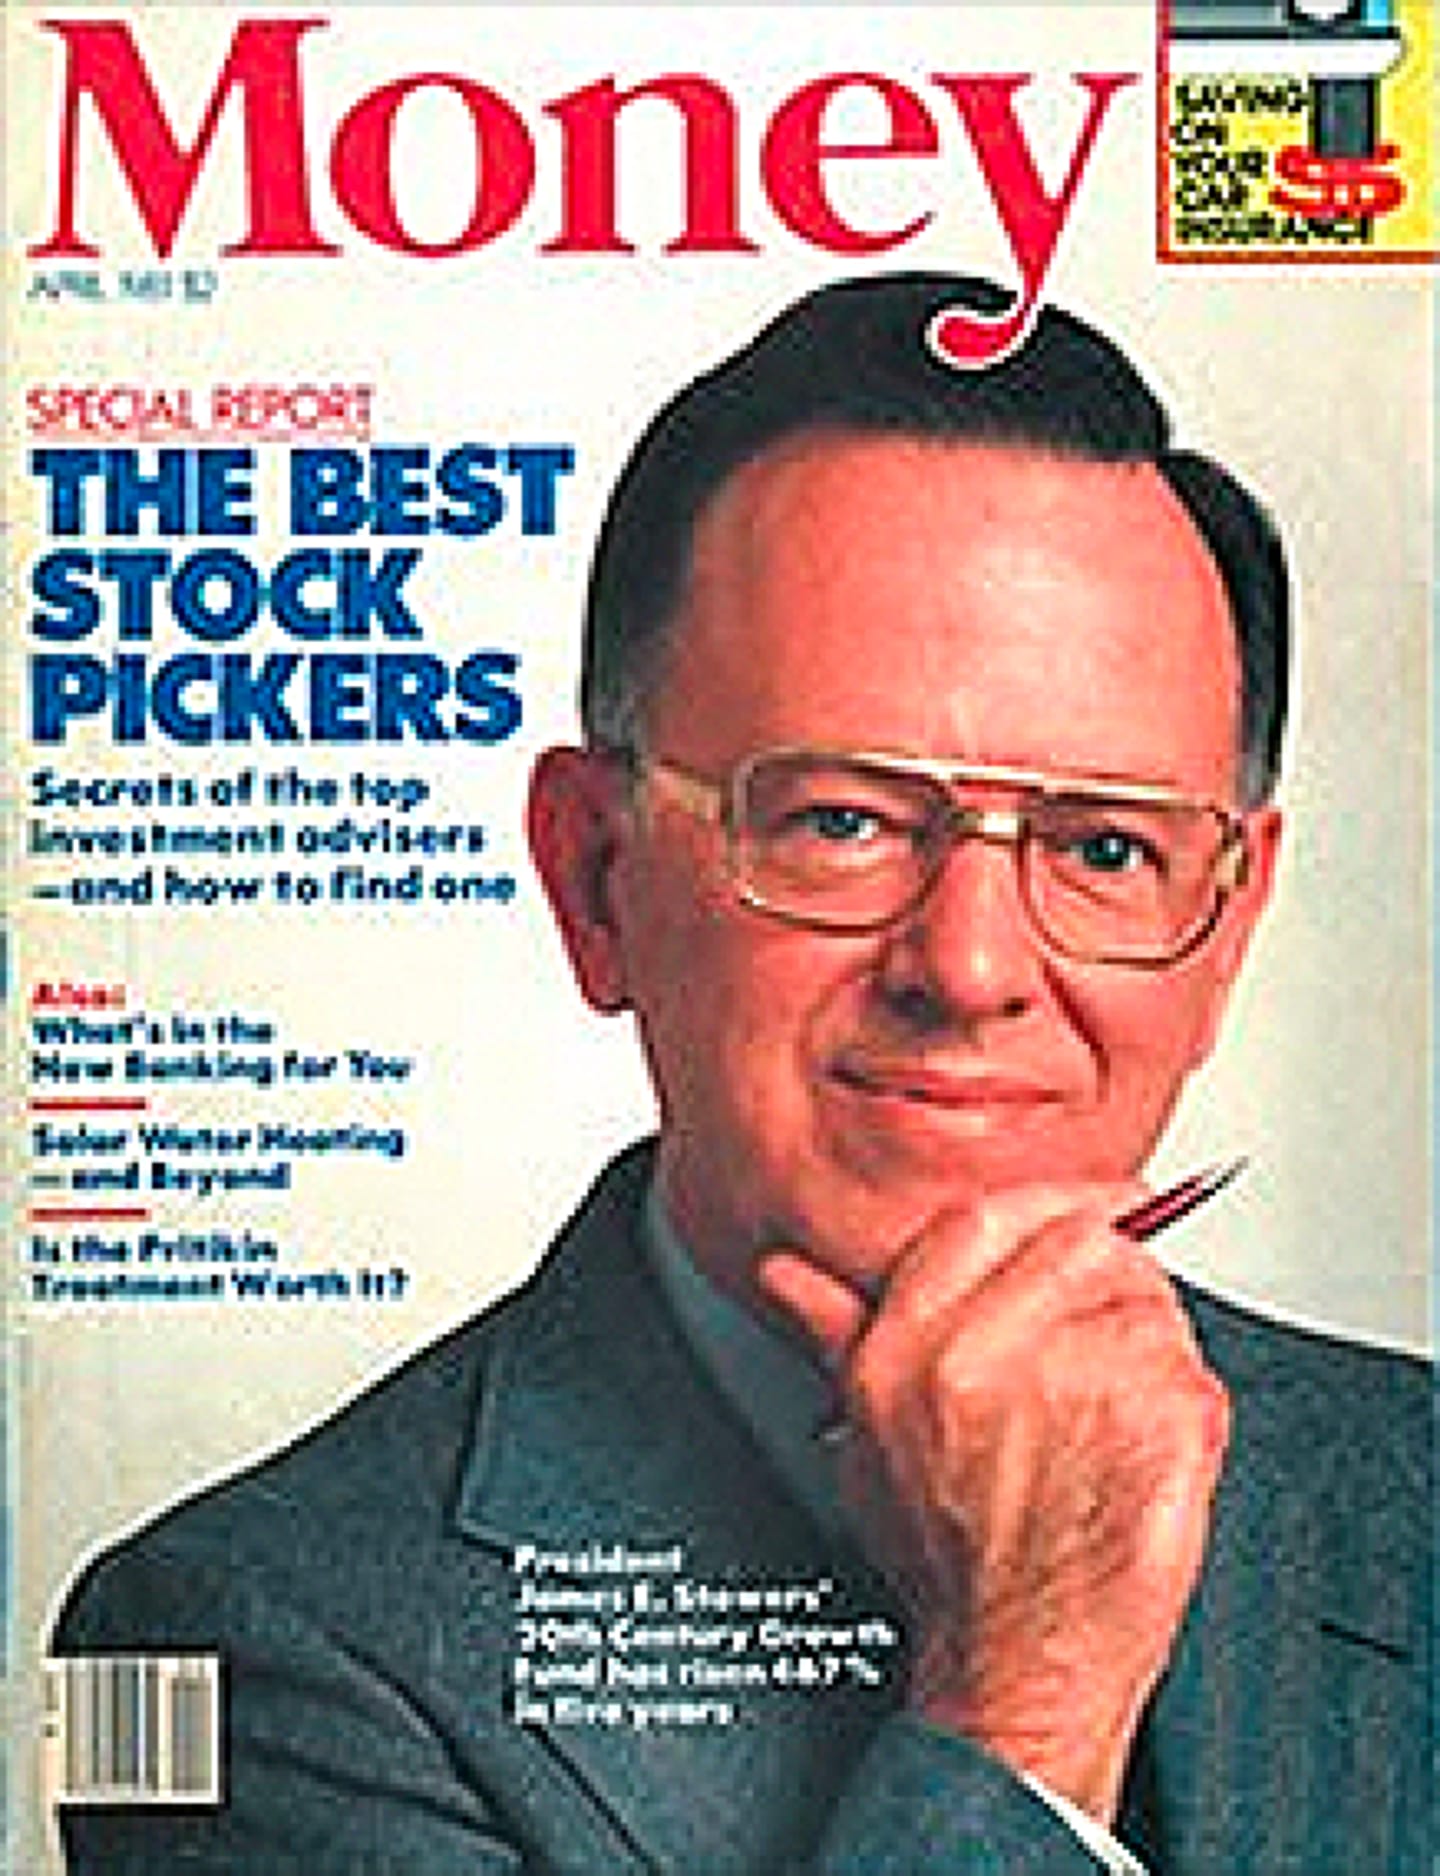 Jim Stowers on the cover of Money Magazine.